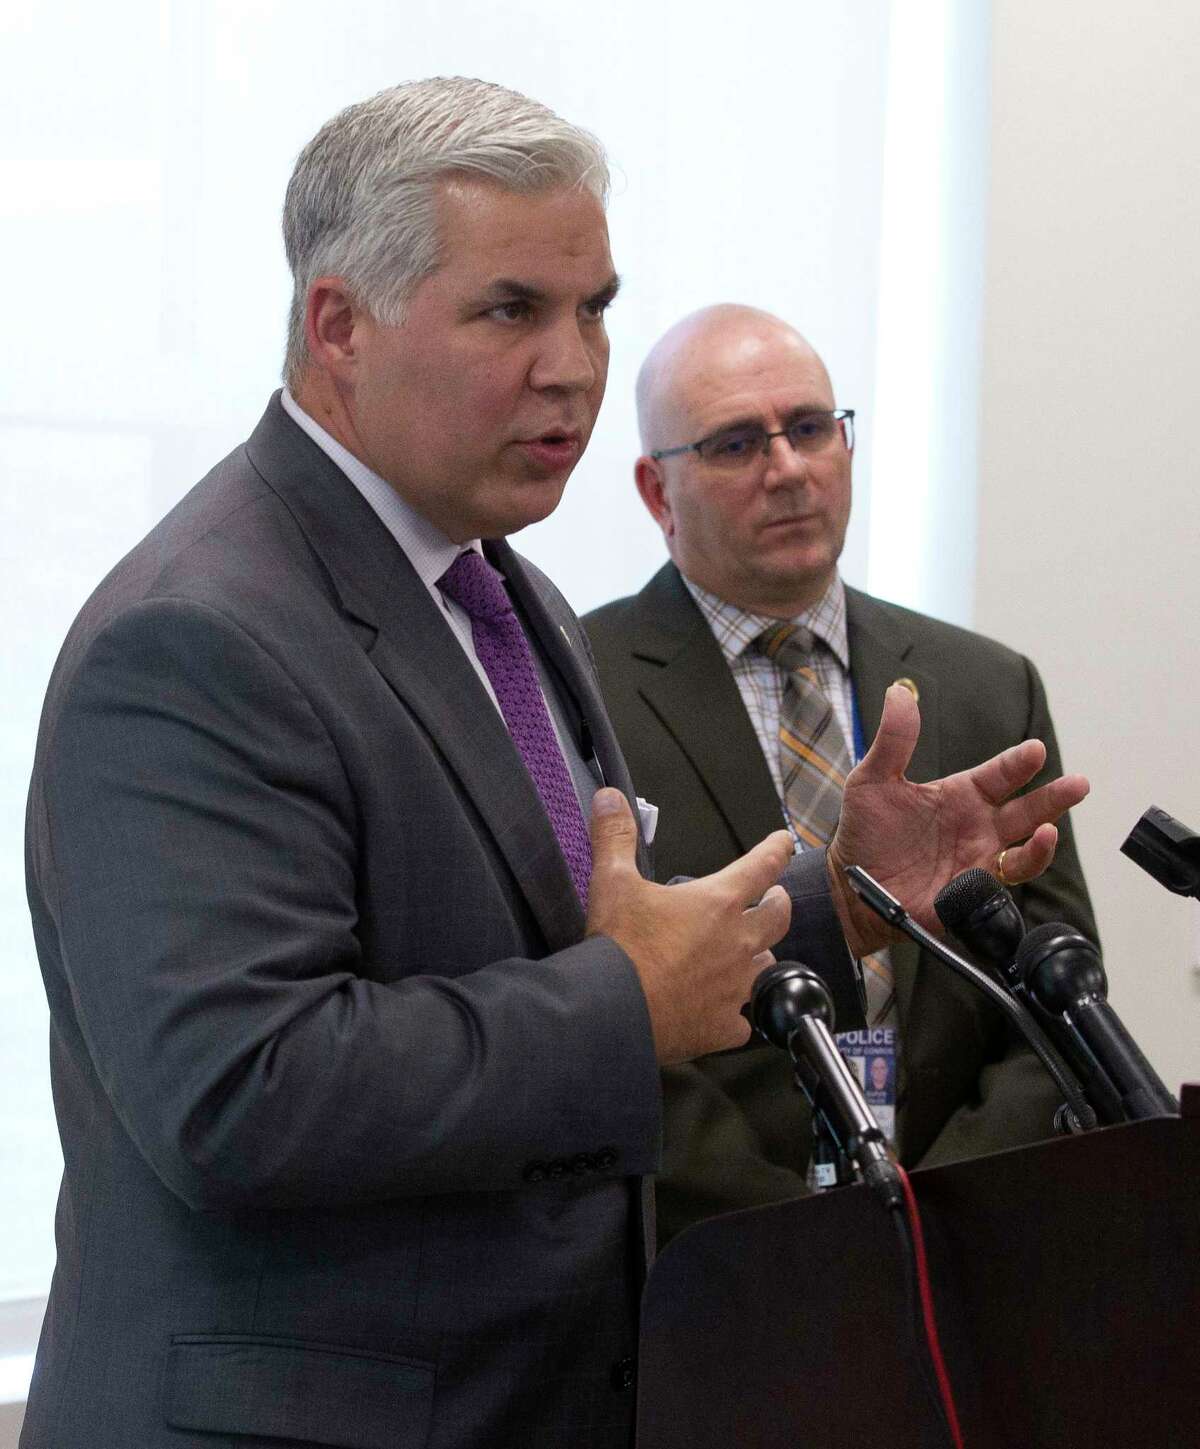 Montgomery County District Attorney Brett Ligon speaks beside Conroe Police Chief Philip Dupuis during a press conference where the body camera video from a shooting involving Conroe police officer Greg Vradenburg was released Thursday, May 11, 2017, in Conroe. Christopher Ryan Hatton, 28, shot at Vradenburg following a traffic stop in January 2016. Hatton was convicted of first-degree felony aggravated assault of a public servant in 40 minutes gave him a 99-year sentence and a $10,000 fine. Hatton will not be eligible for parole until he is 58.